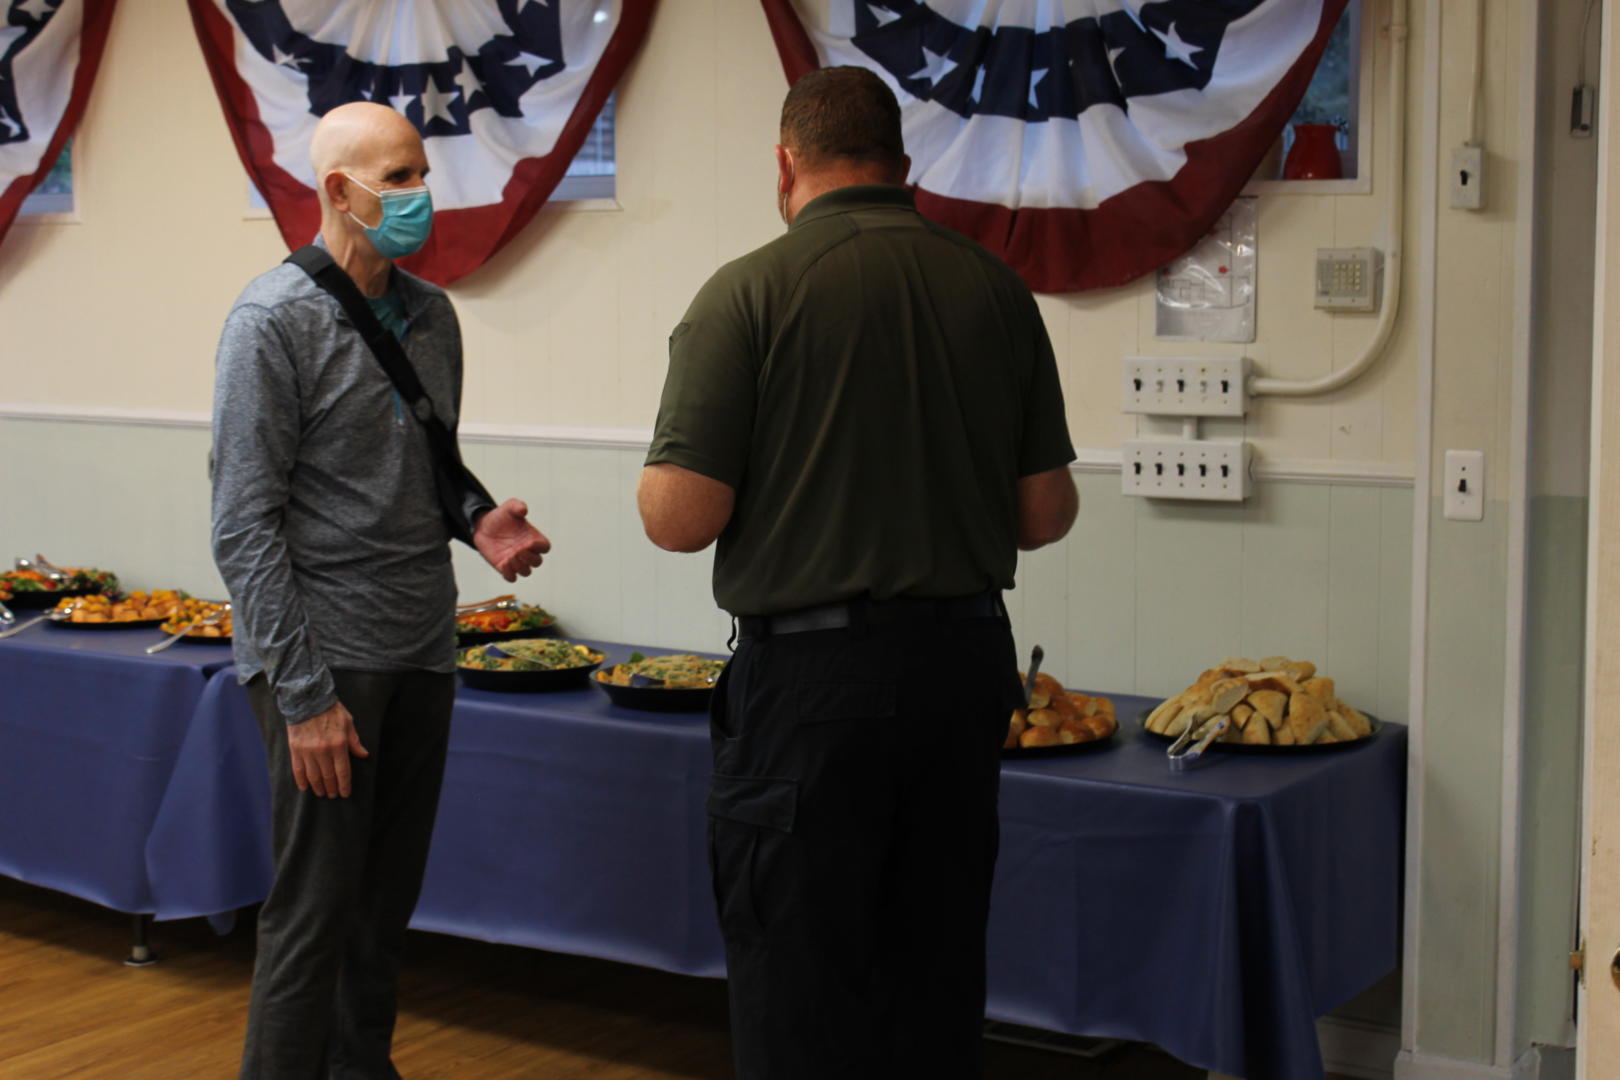 The appreciation event began with dinner and networking among volunteers and staff. (Photo Courtesy Town of Brookline)